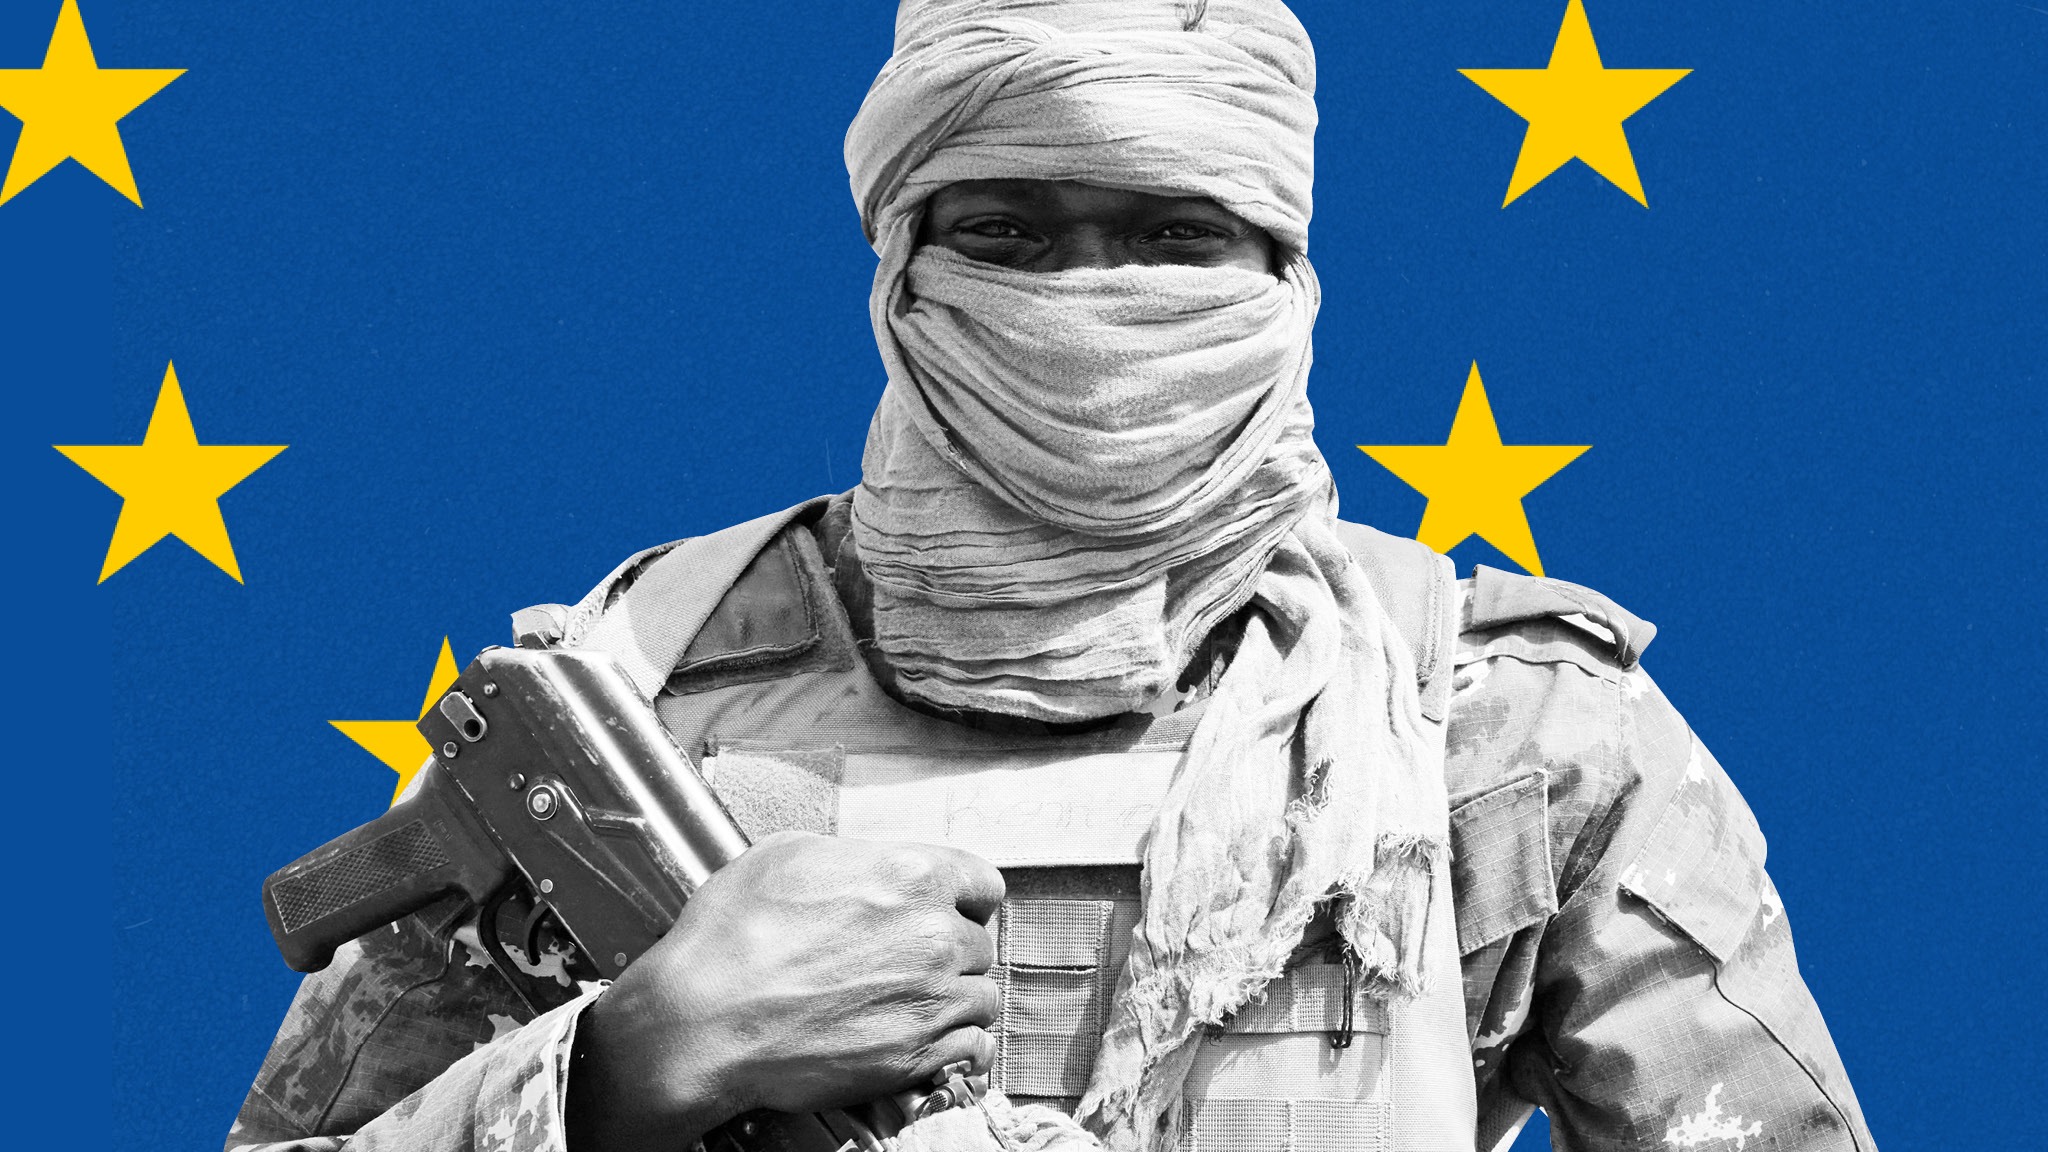 We need arms': Europe's risky move to project its influence in conflict  zones | Financial Times